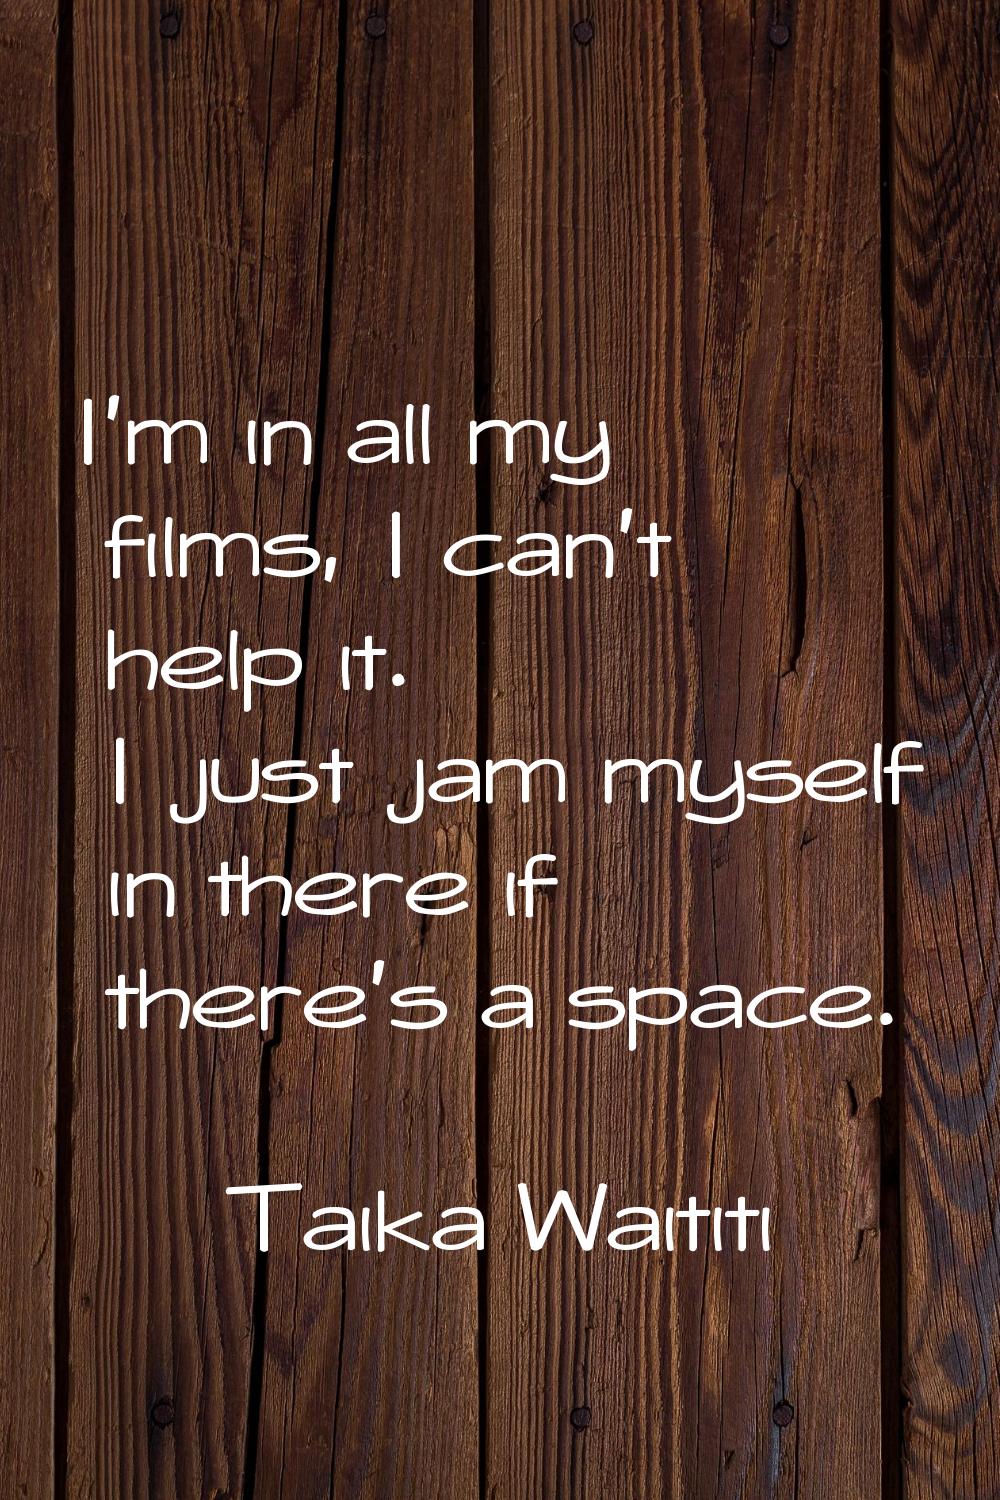 I'm in all my films, I can't help it. I just jam myself in there if there's a space.